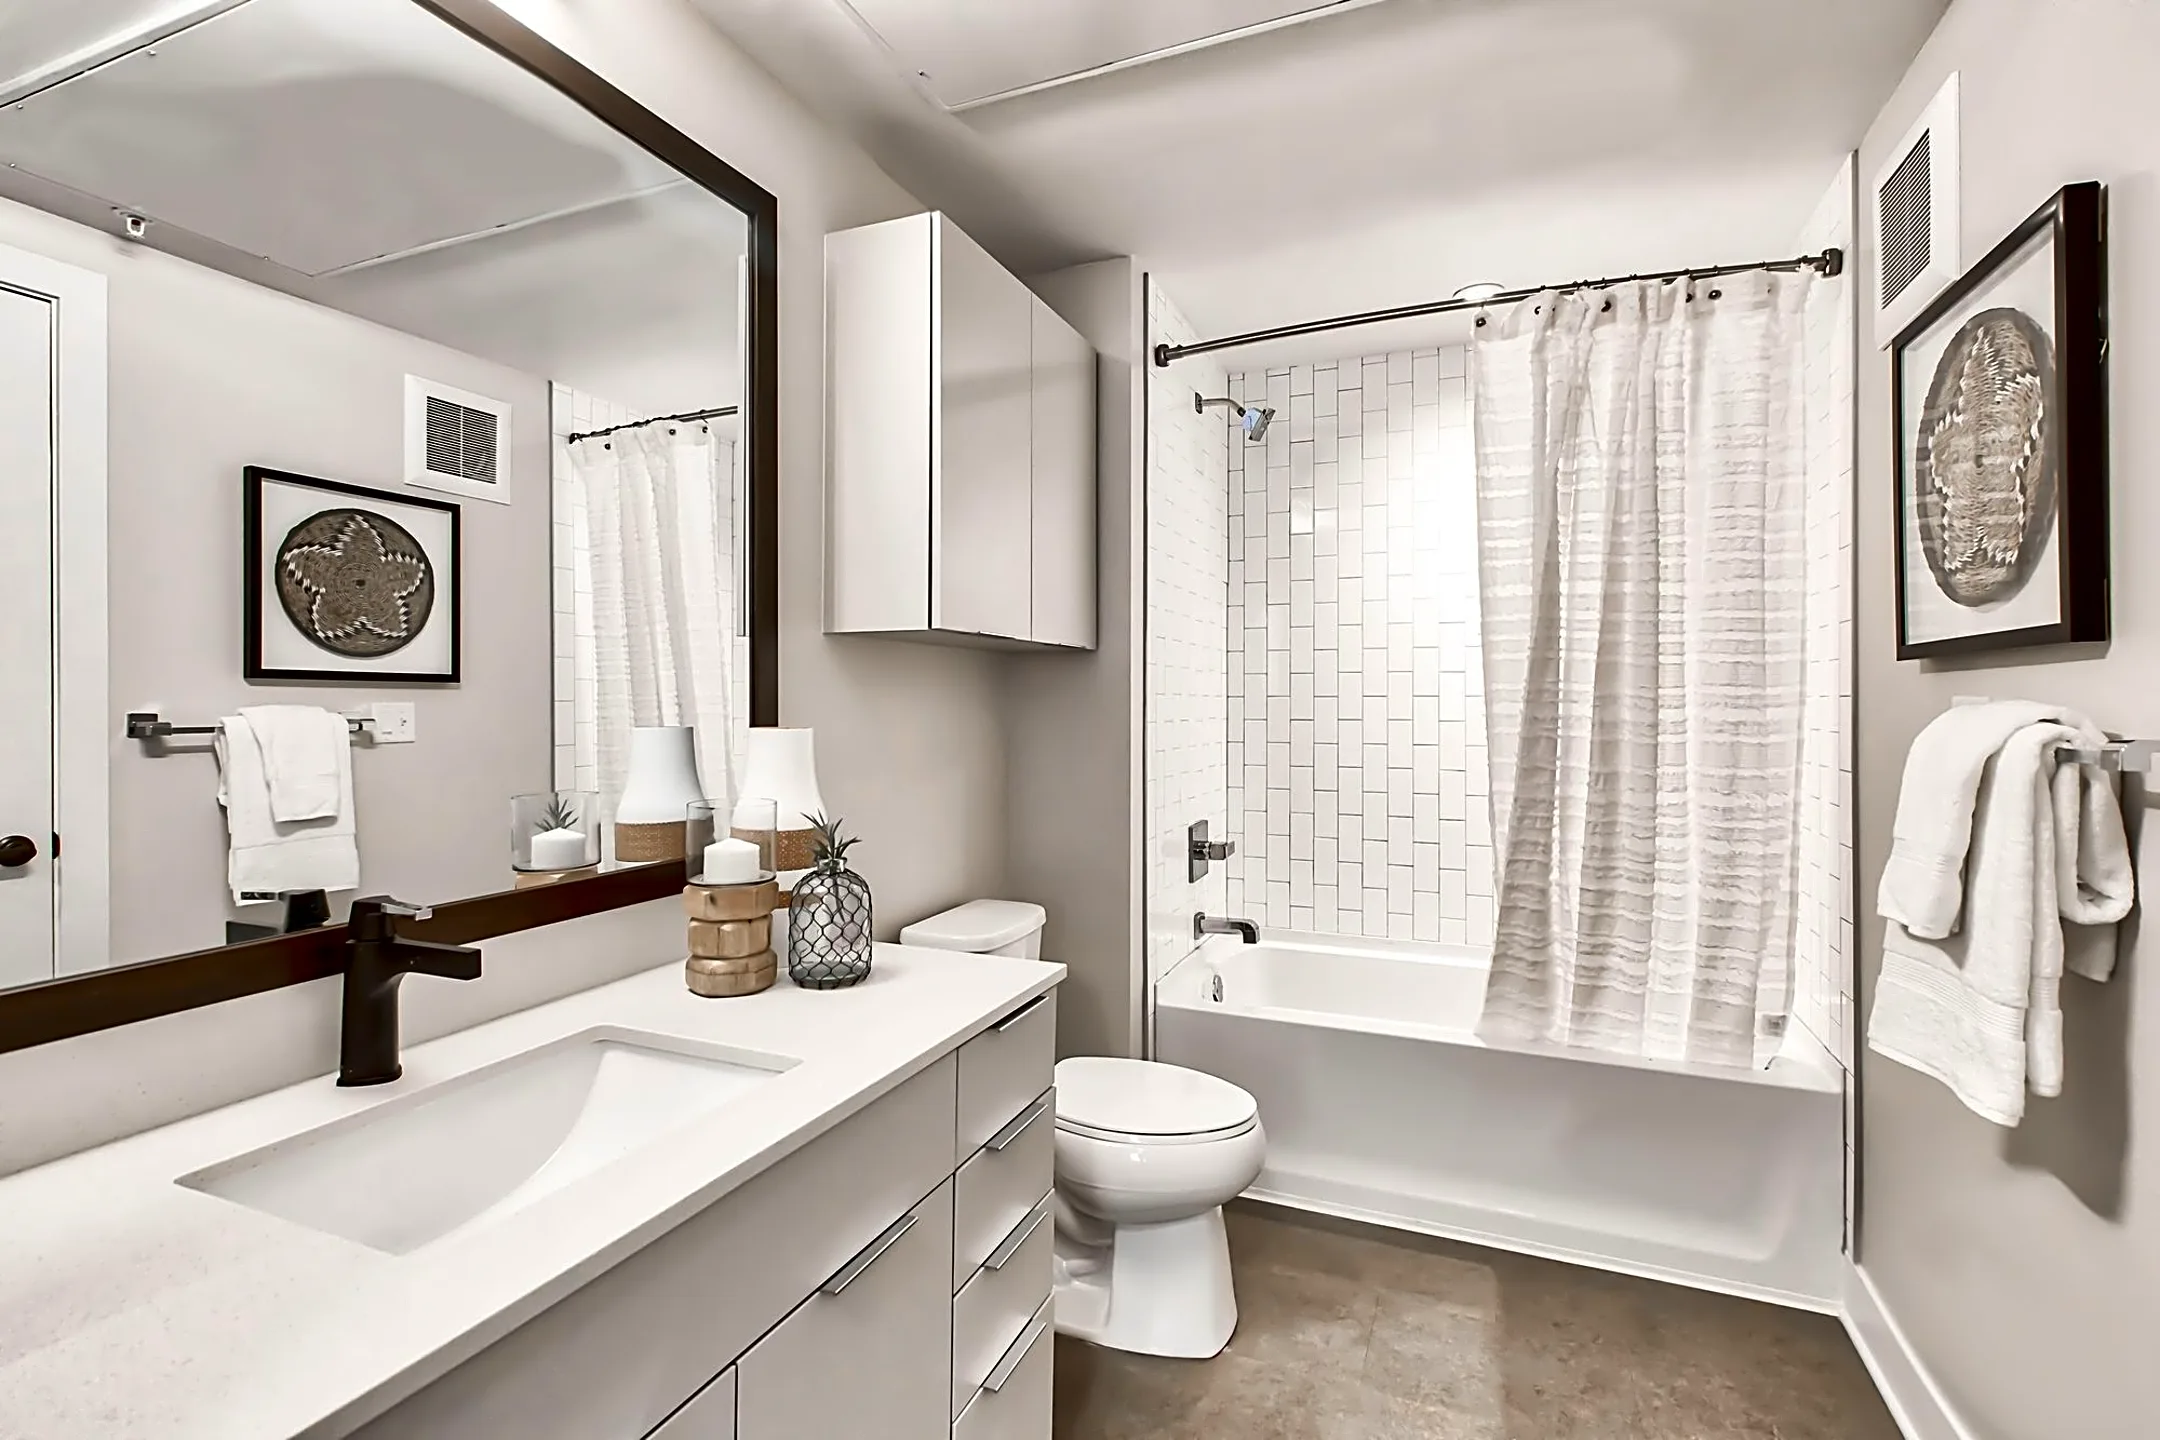 Bathroom - Ascent Apartments - Westminster, CO